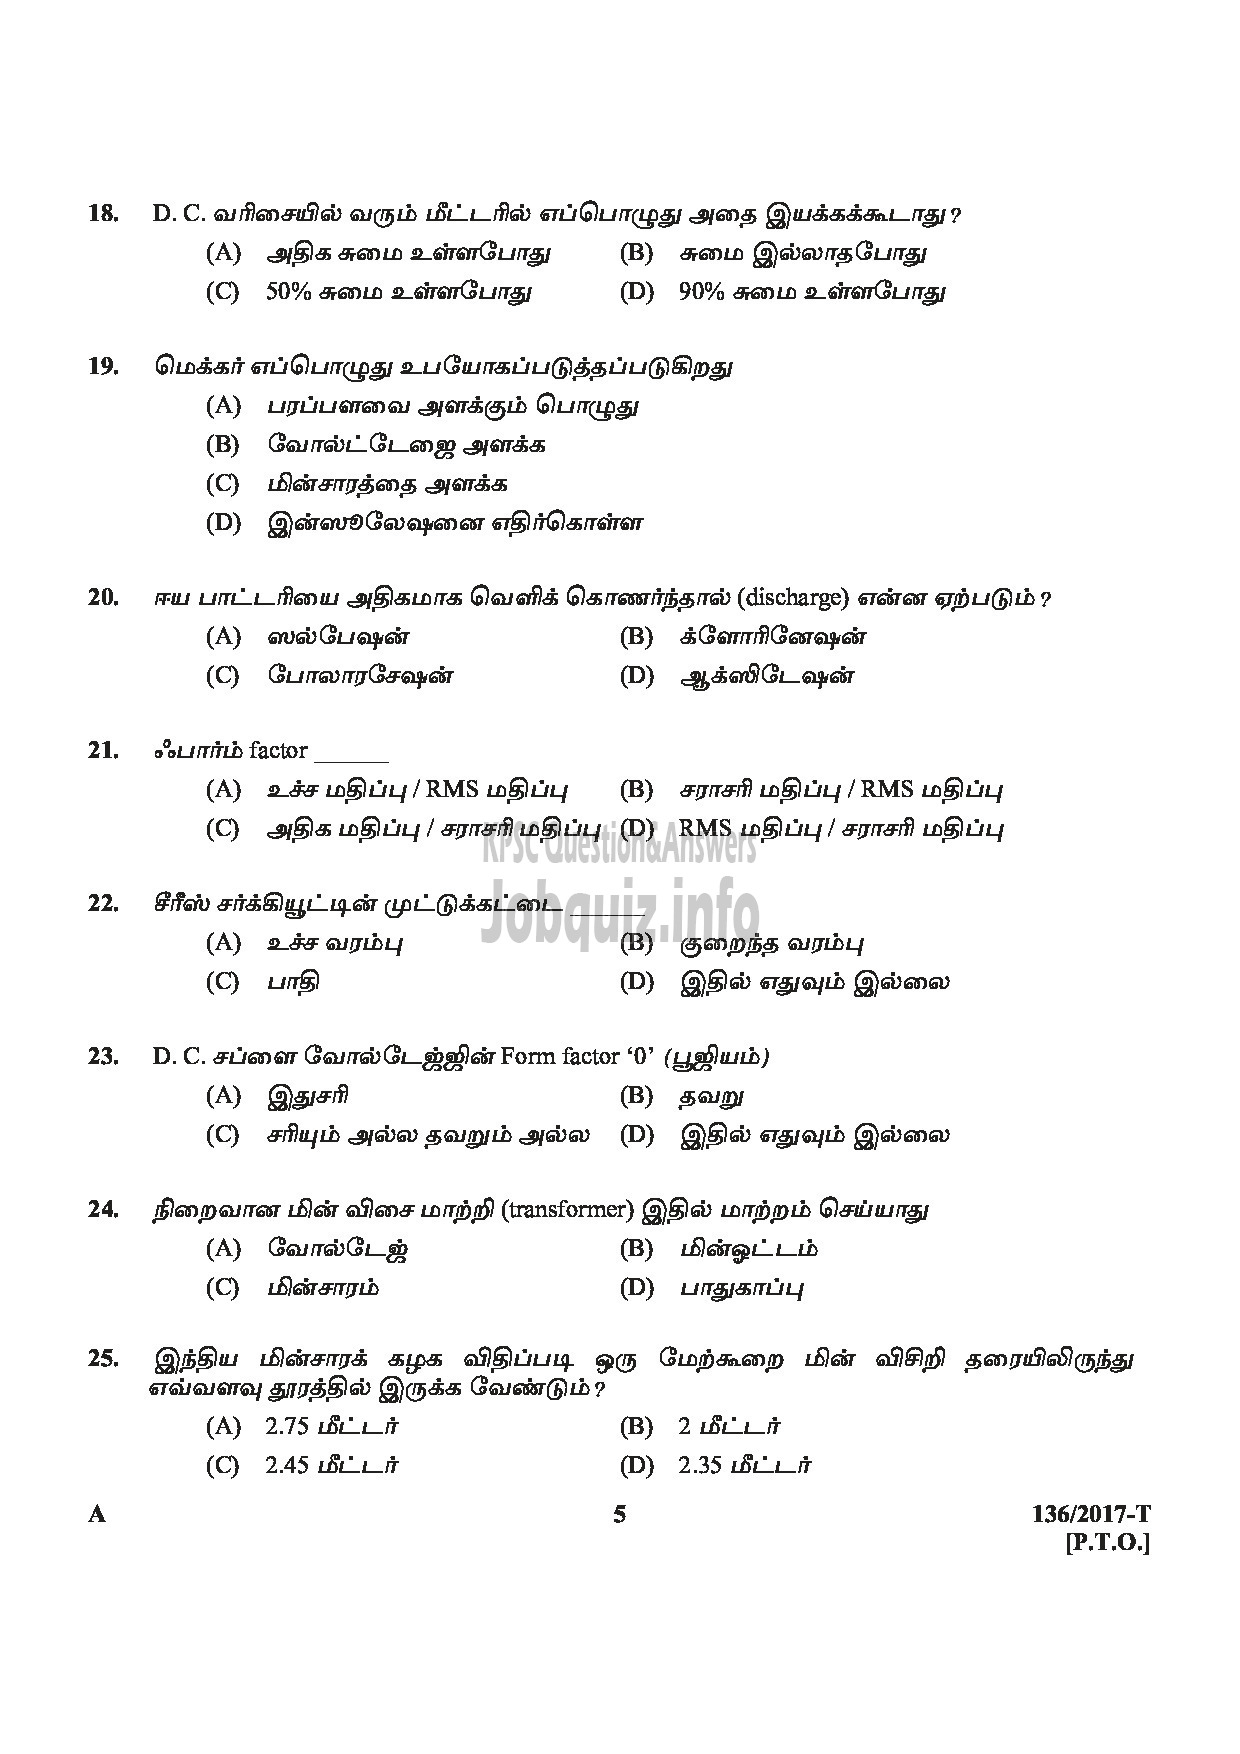 Kerala PSC Question Paper - METER READER/SPOT BILLER SPECIAL RECRUITMENT FROM AMONG ST ONLY MEDIUM OF QUESTION TAMIL-5